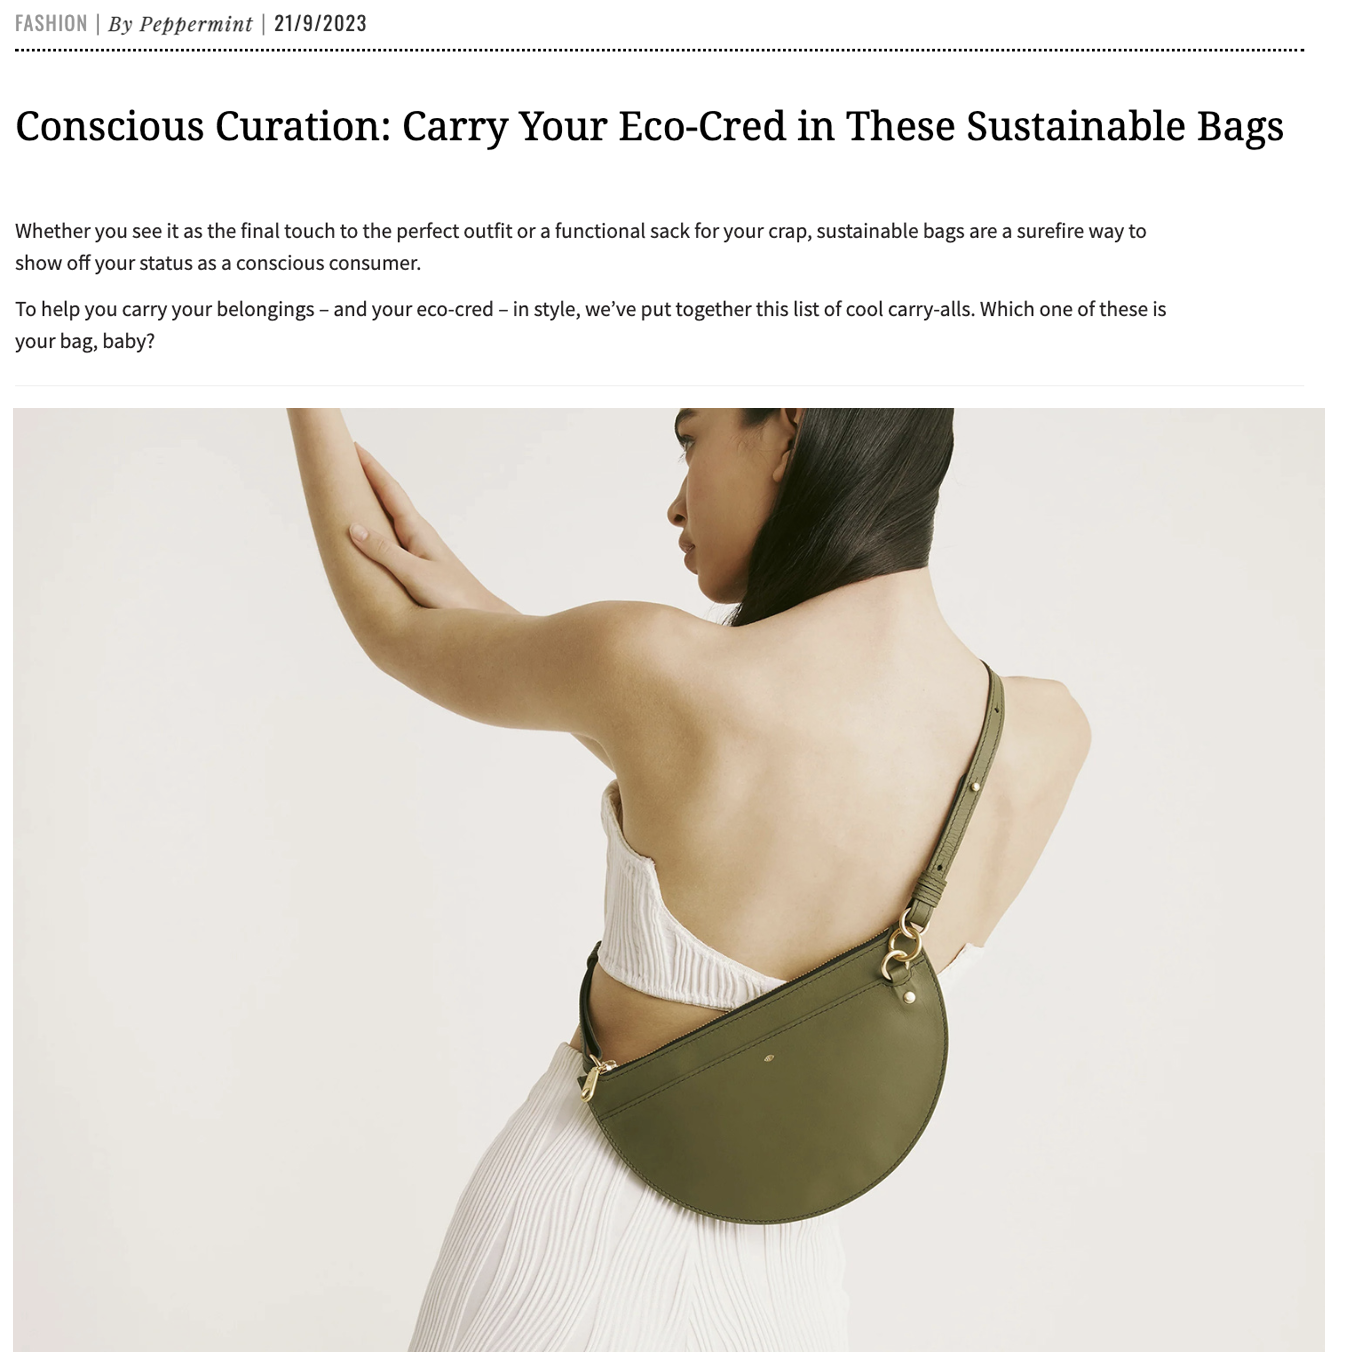 featured in Peppermint: a conscious curation of sustainable bags